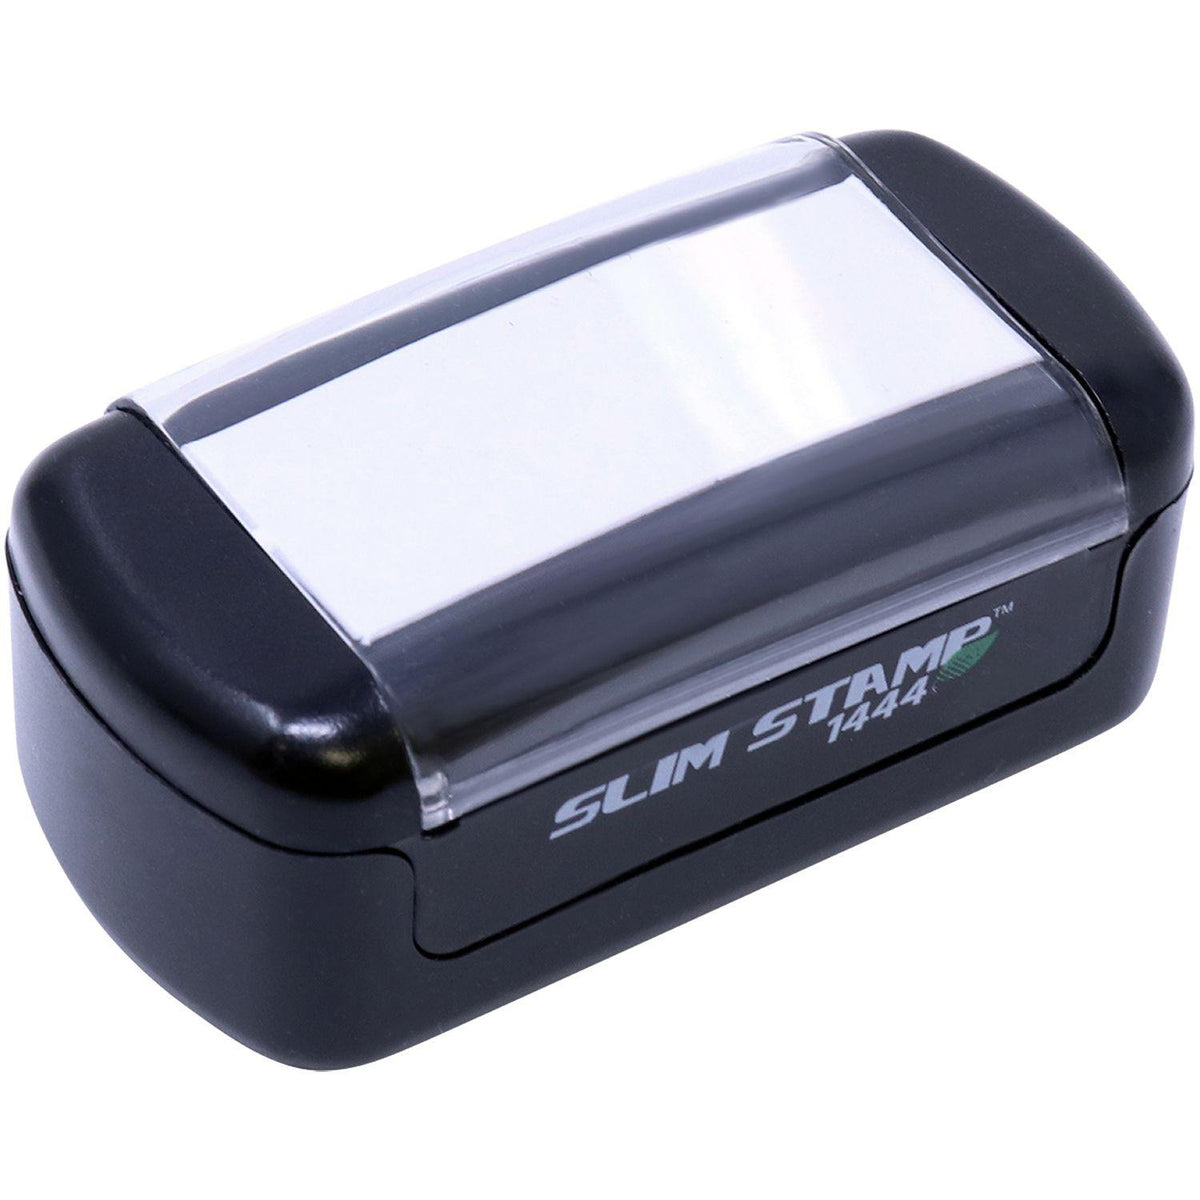 Top Down View of Slim Pre-Inked Contact Tracing Stamp